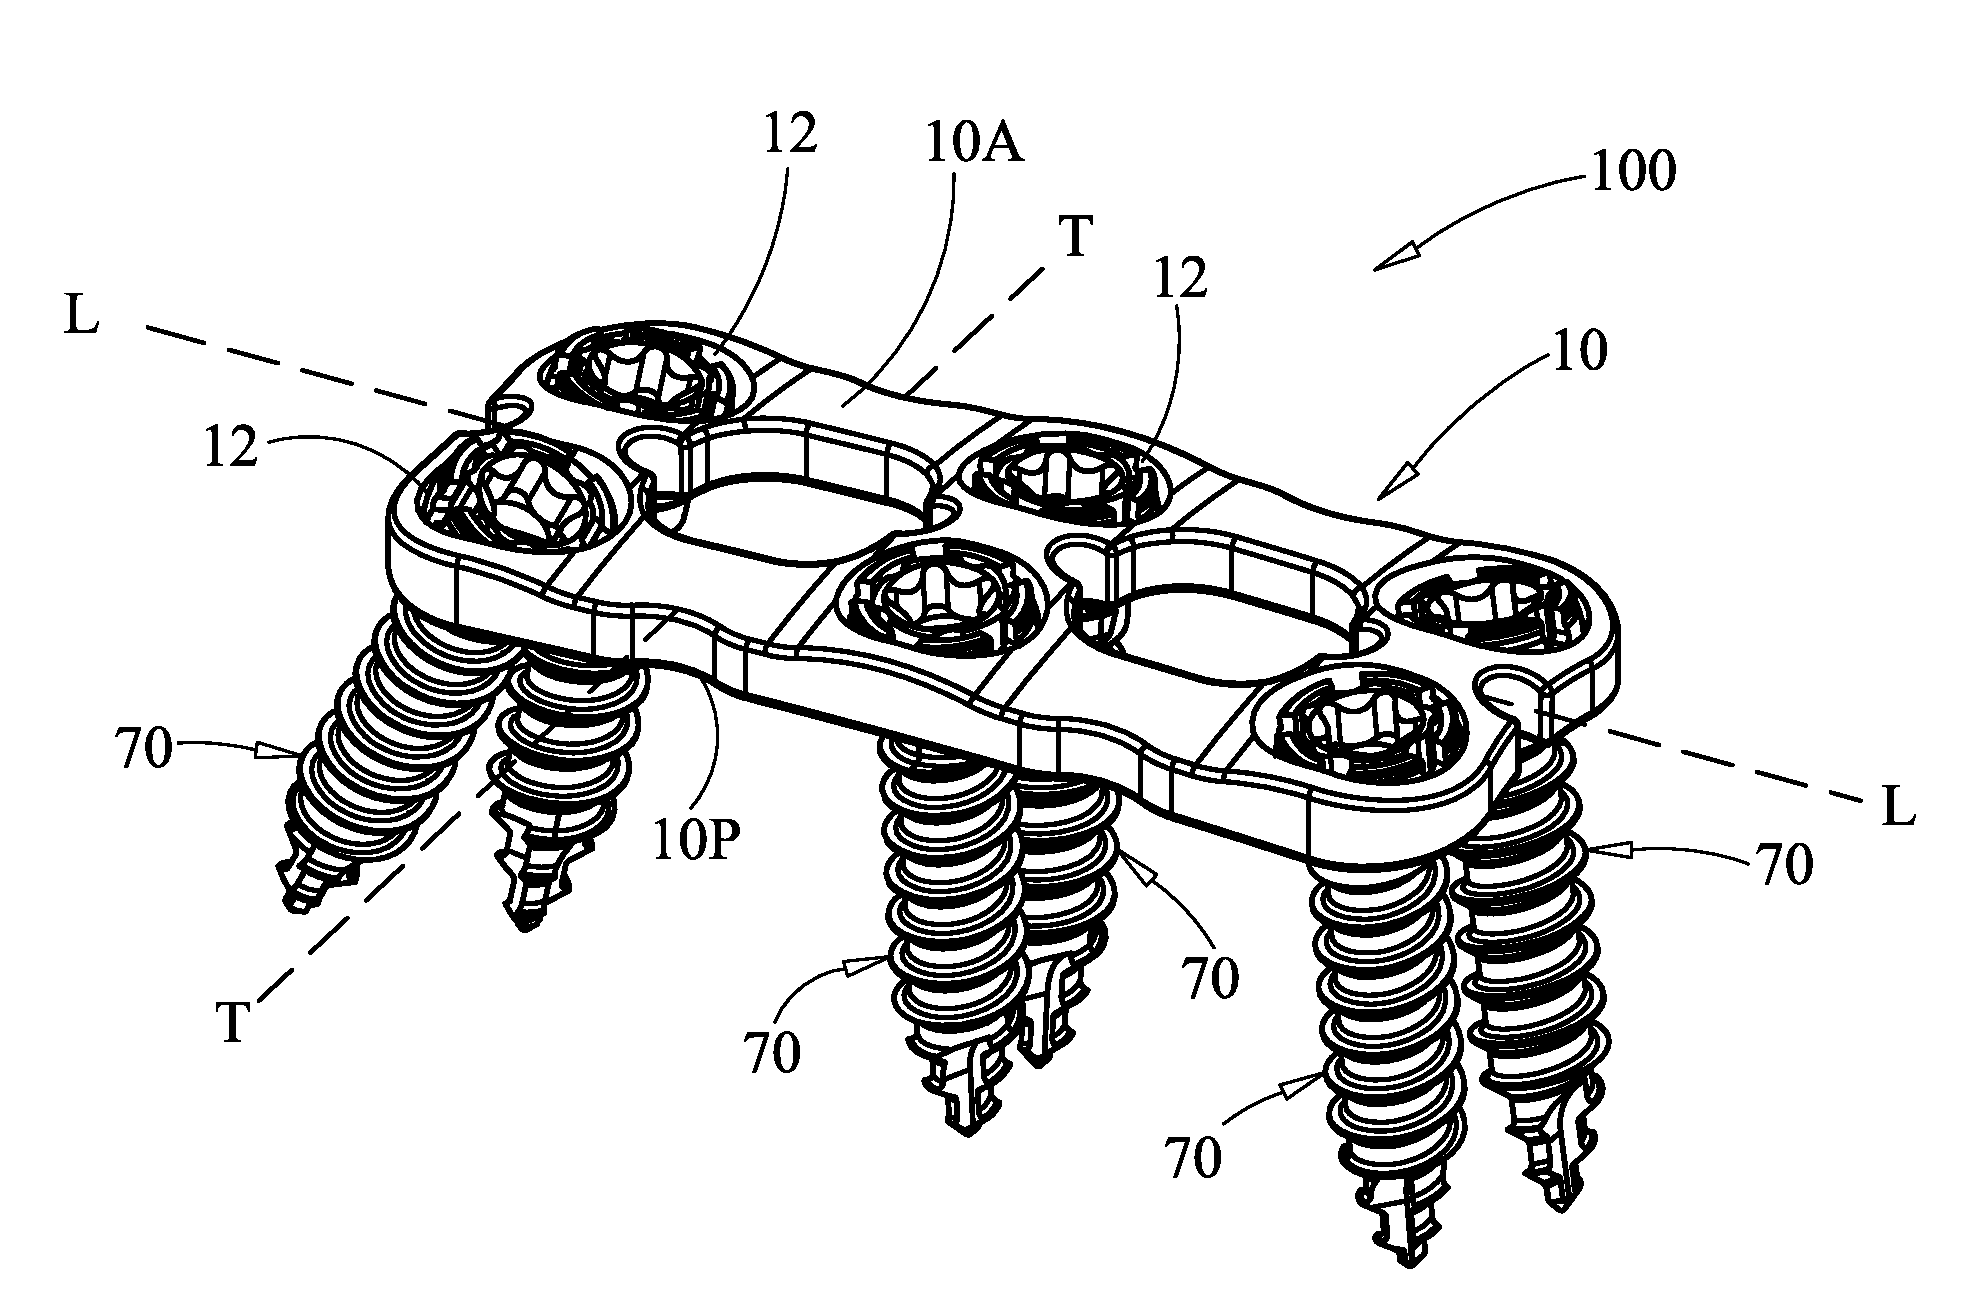 Surgical plate system and method